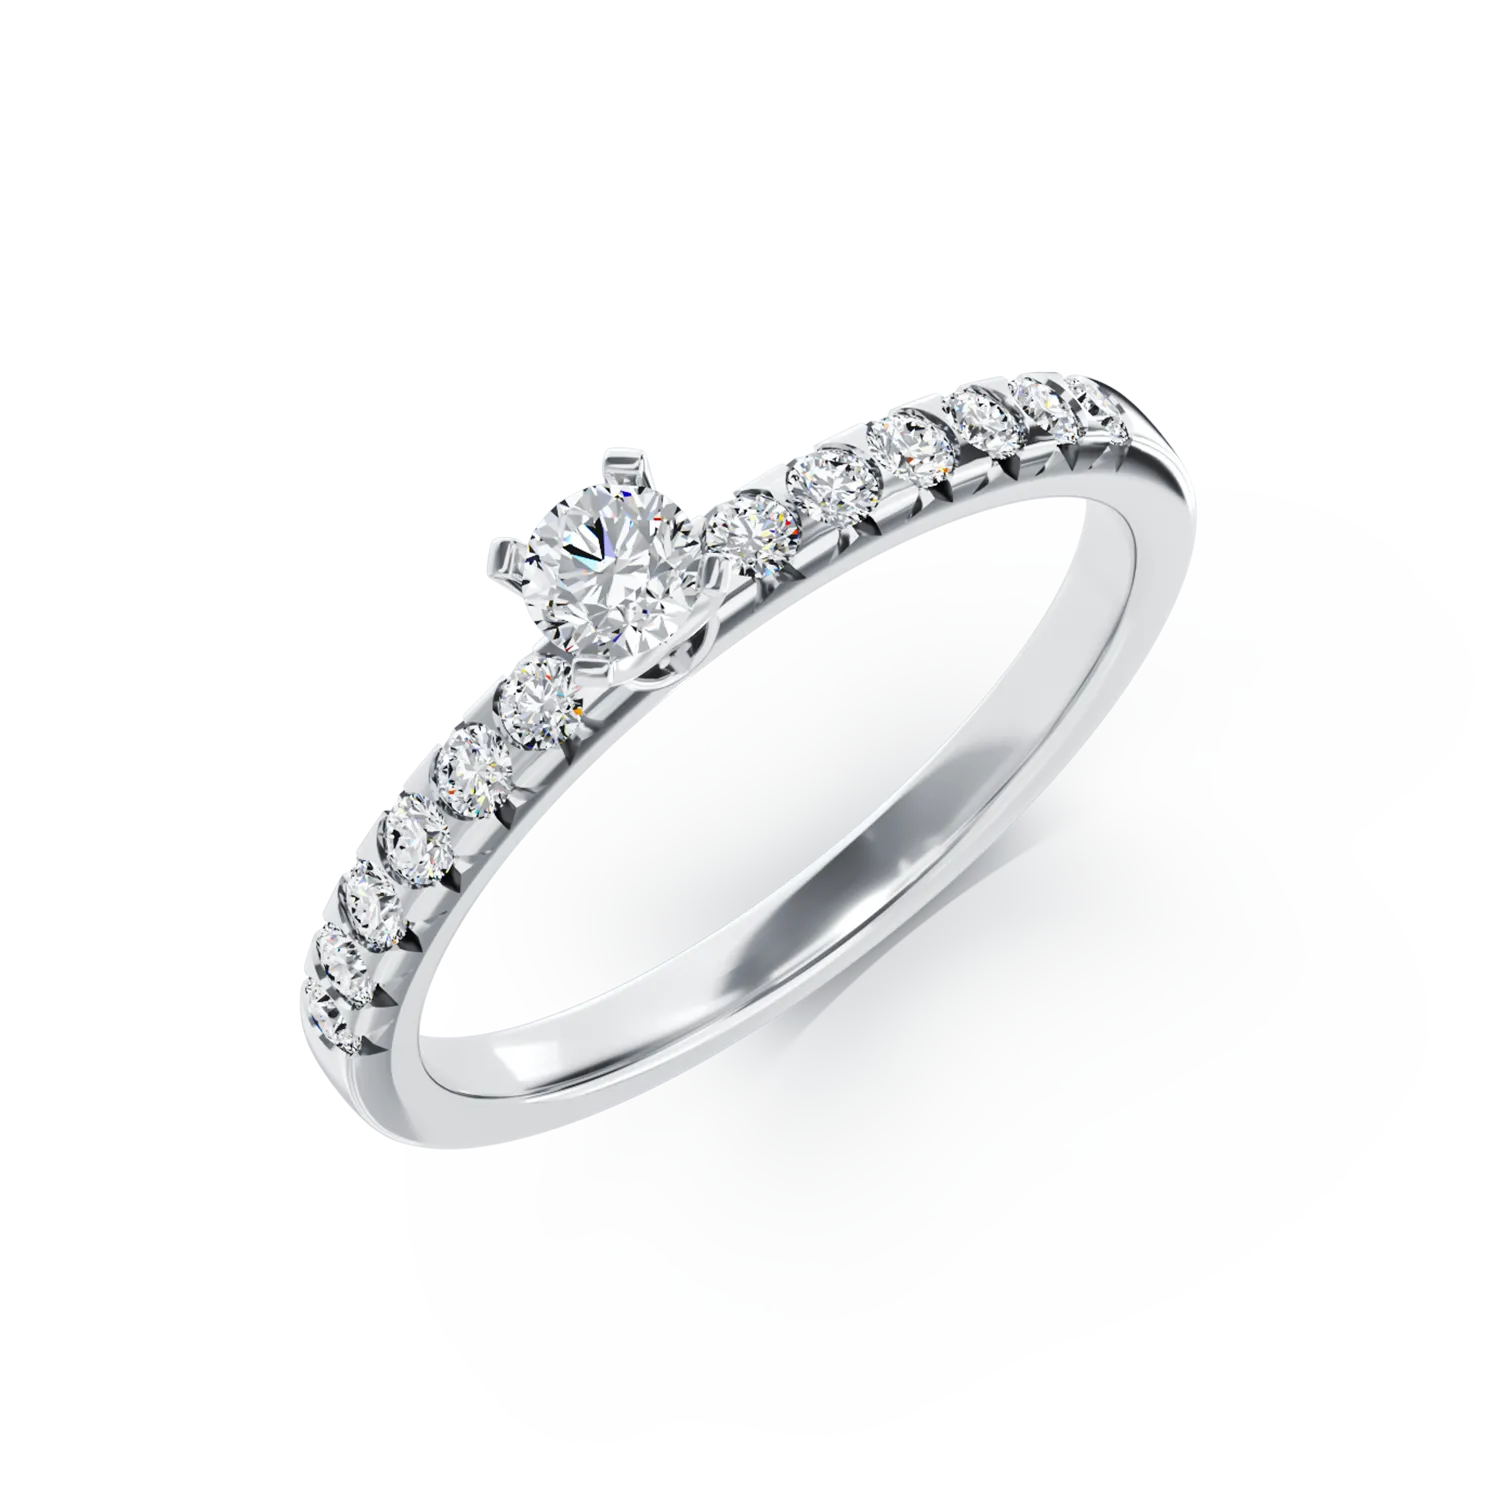 18K white gold engagement ring with 0.25ct diamond and 0.25ct diamonds